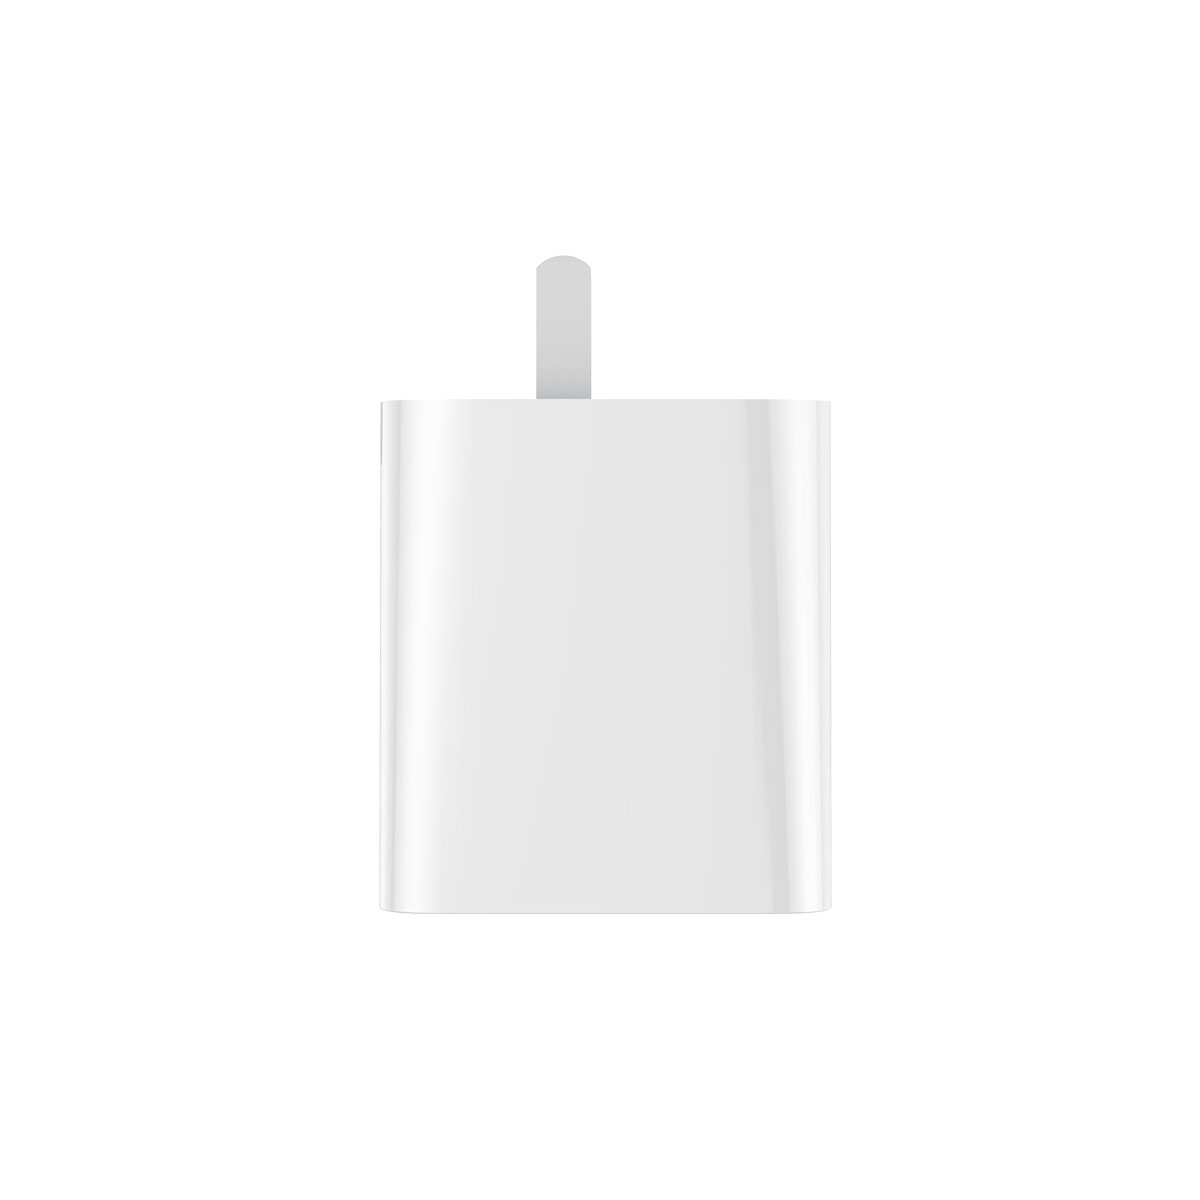 Baseus BS-CH905 30W 5A QC3.0PD3.0デュアル出力折りたたみ式Type-CSpeedy PPS Quick Charge USB Universal Charger for Samsung S10 + HUAWEI P30Pro